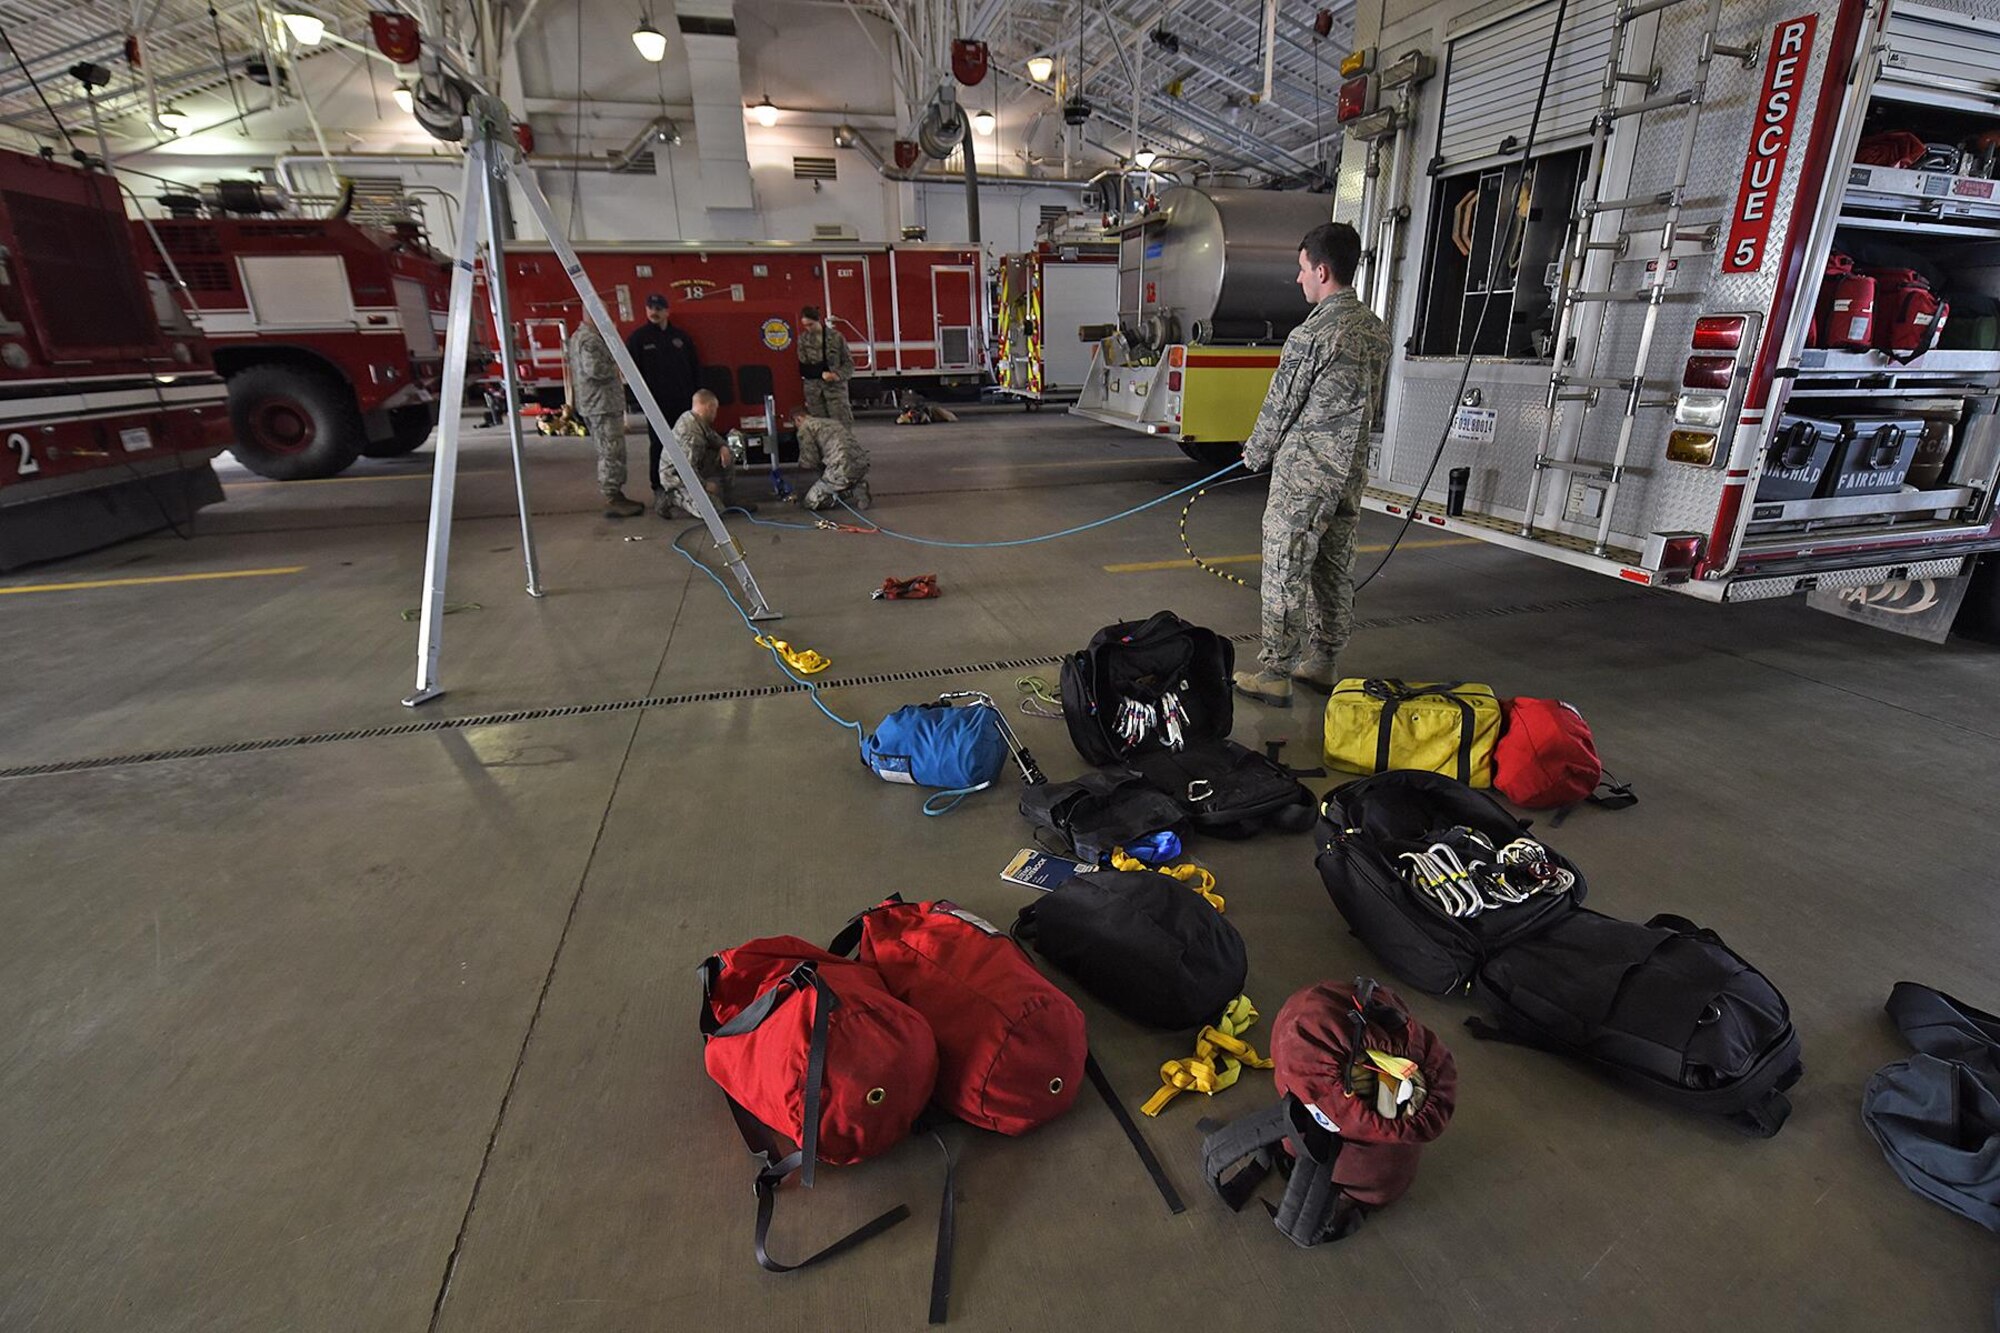 92nd Civil Engineer Squadron firefighters work together to build a ‘z’-rig rope system during a confined spaces training Jan. 27, 2017, Fairchild Air Force Base, Wash. Ropes and knots are an important aspect of fire protection training and ensure Fairchild firefighters are always “rescue ready.”(U.S. Air Force photo/Senior Airman Mackenzie Richardson)